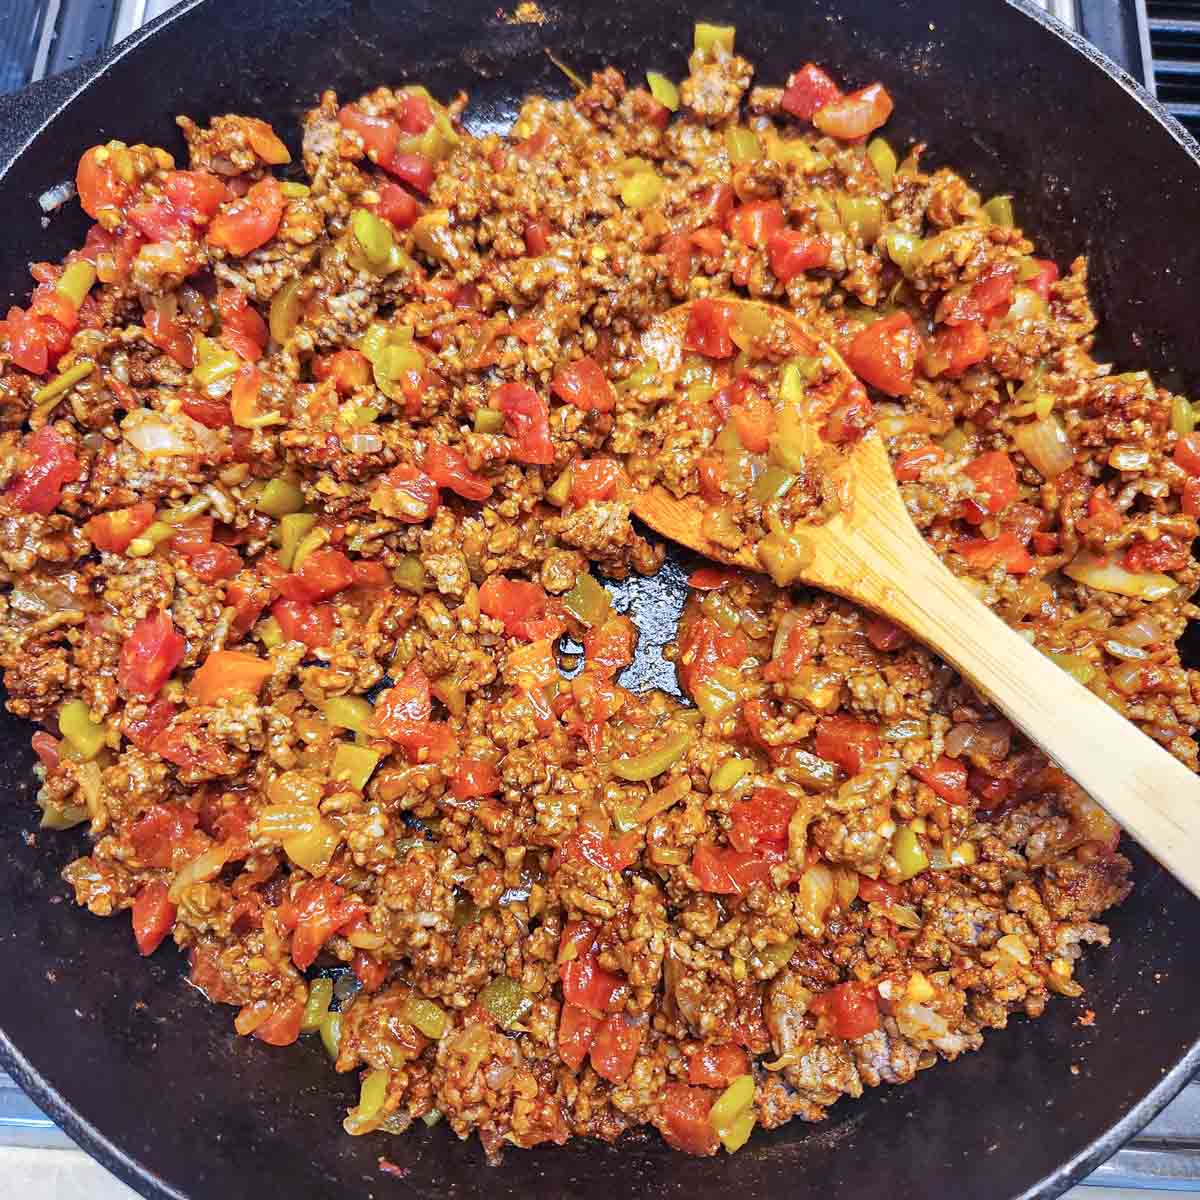 ground beef, onions, garlic, tomatoes and chilies in a skillet